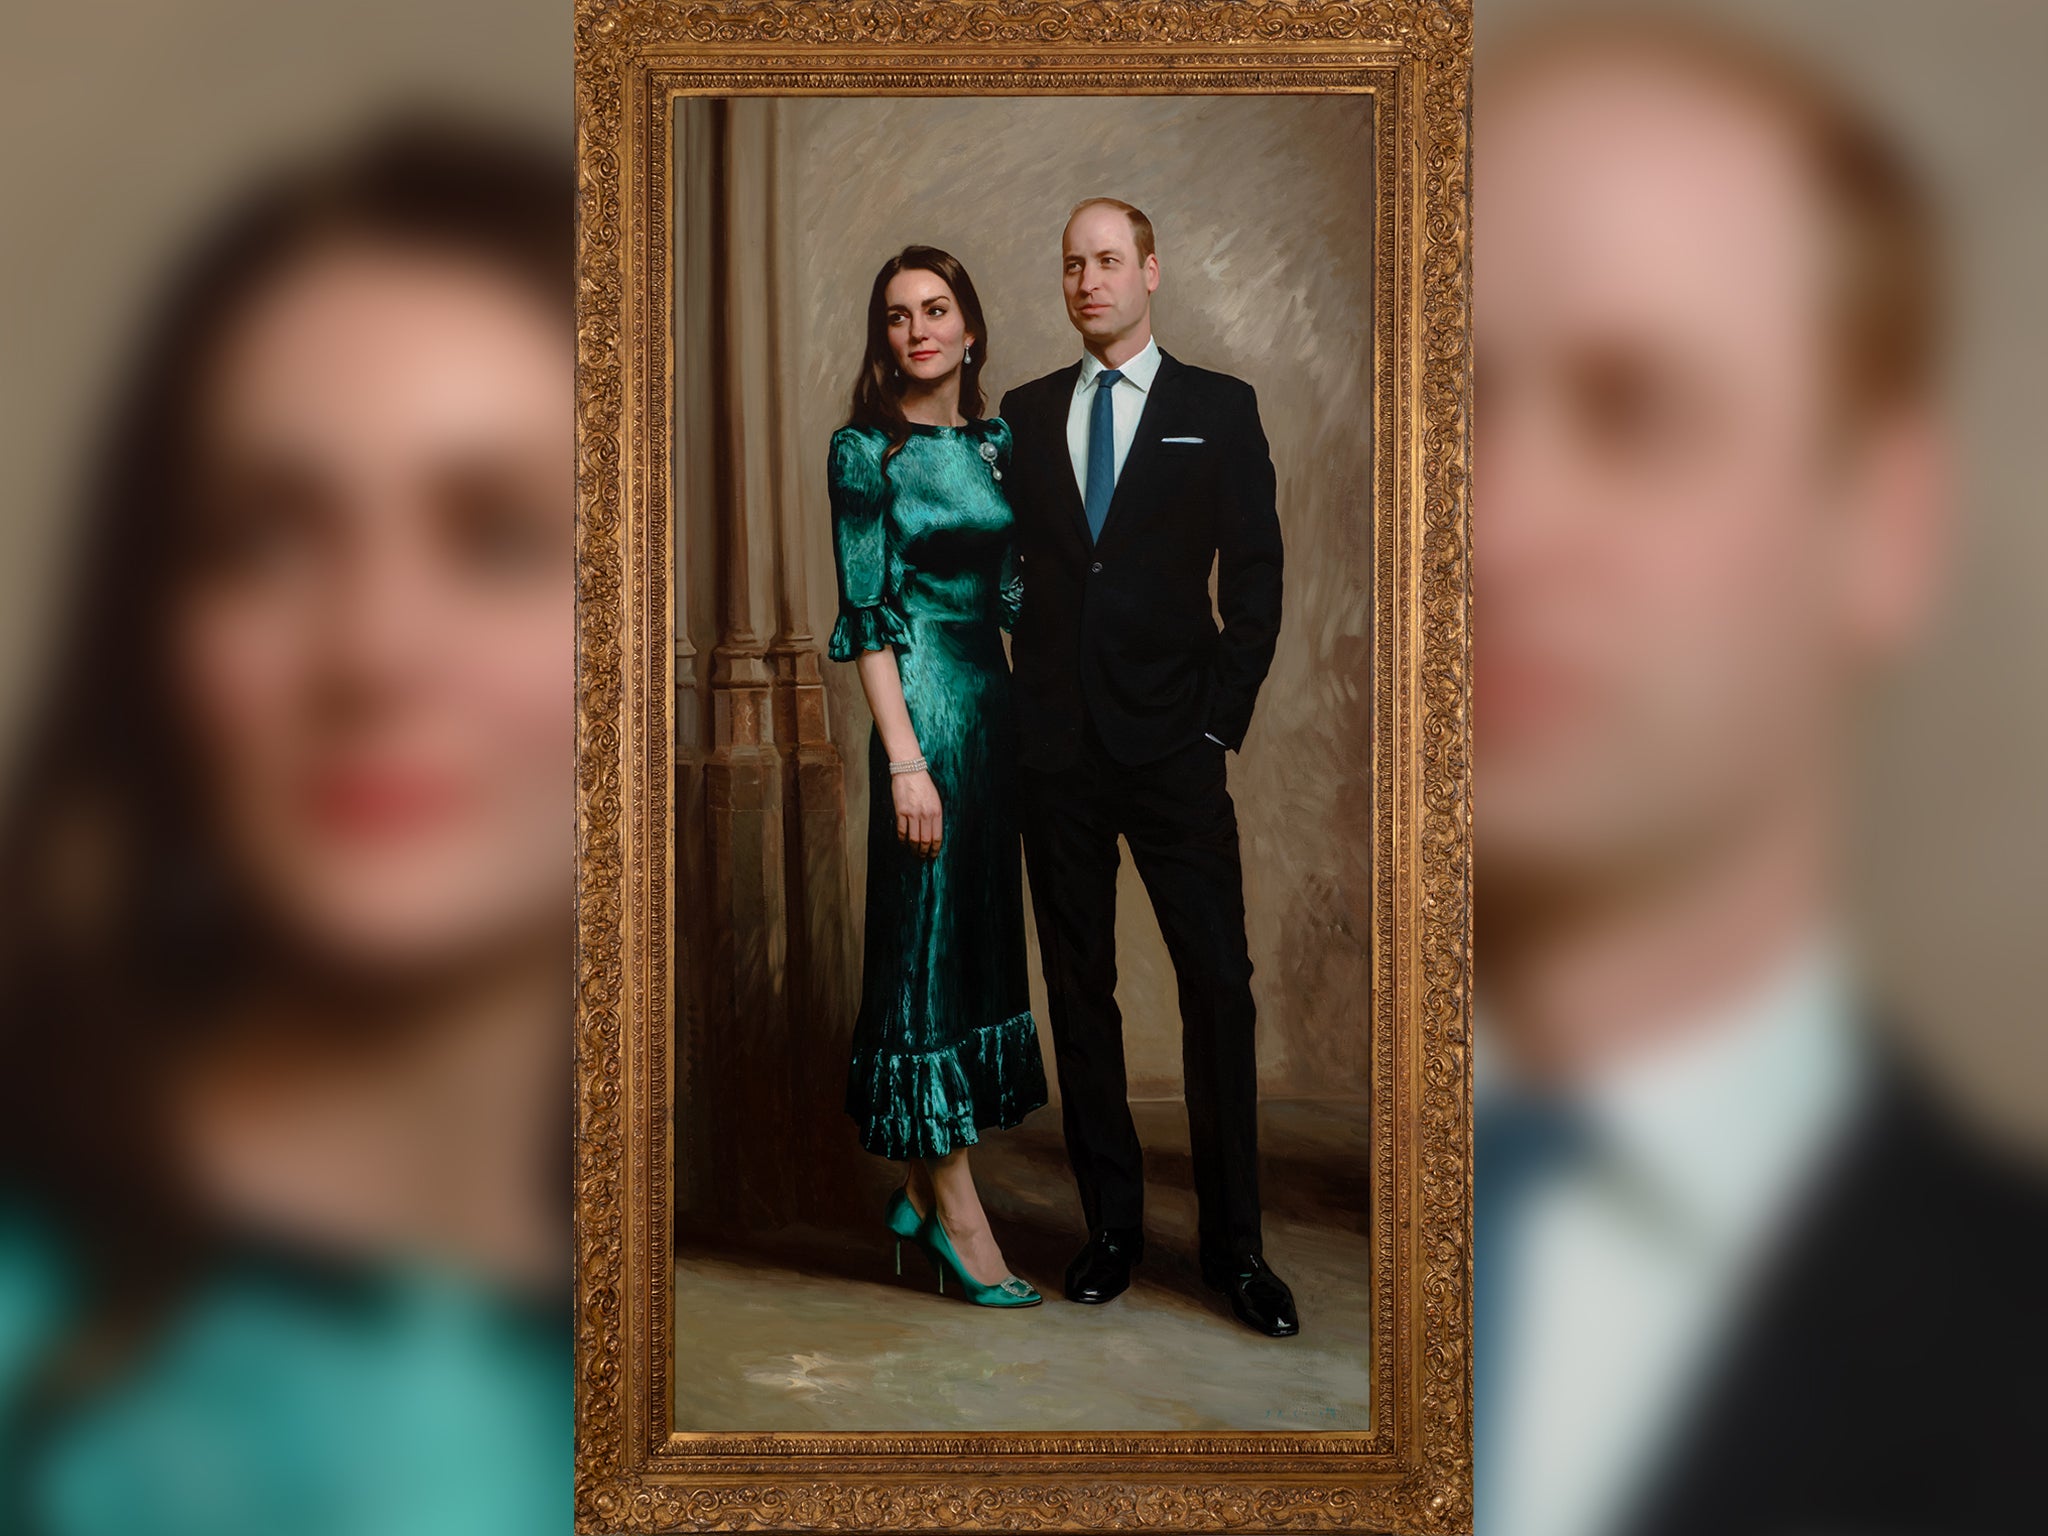 The new portrait of the Duke and Duchess of Cambridge